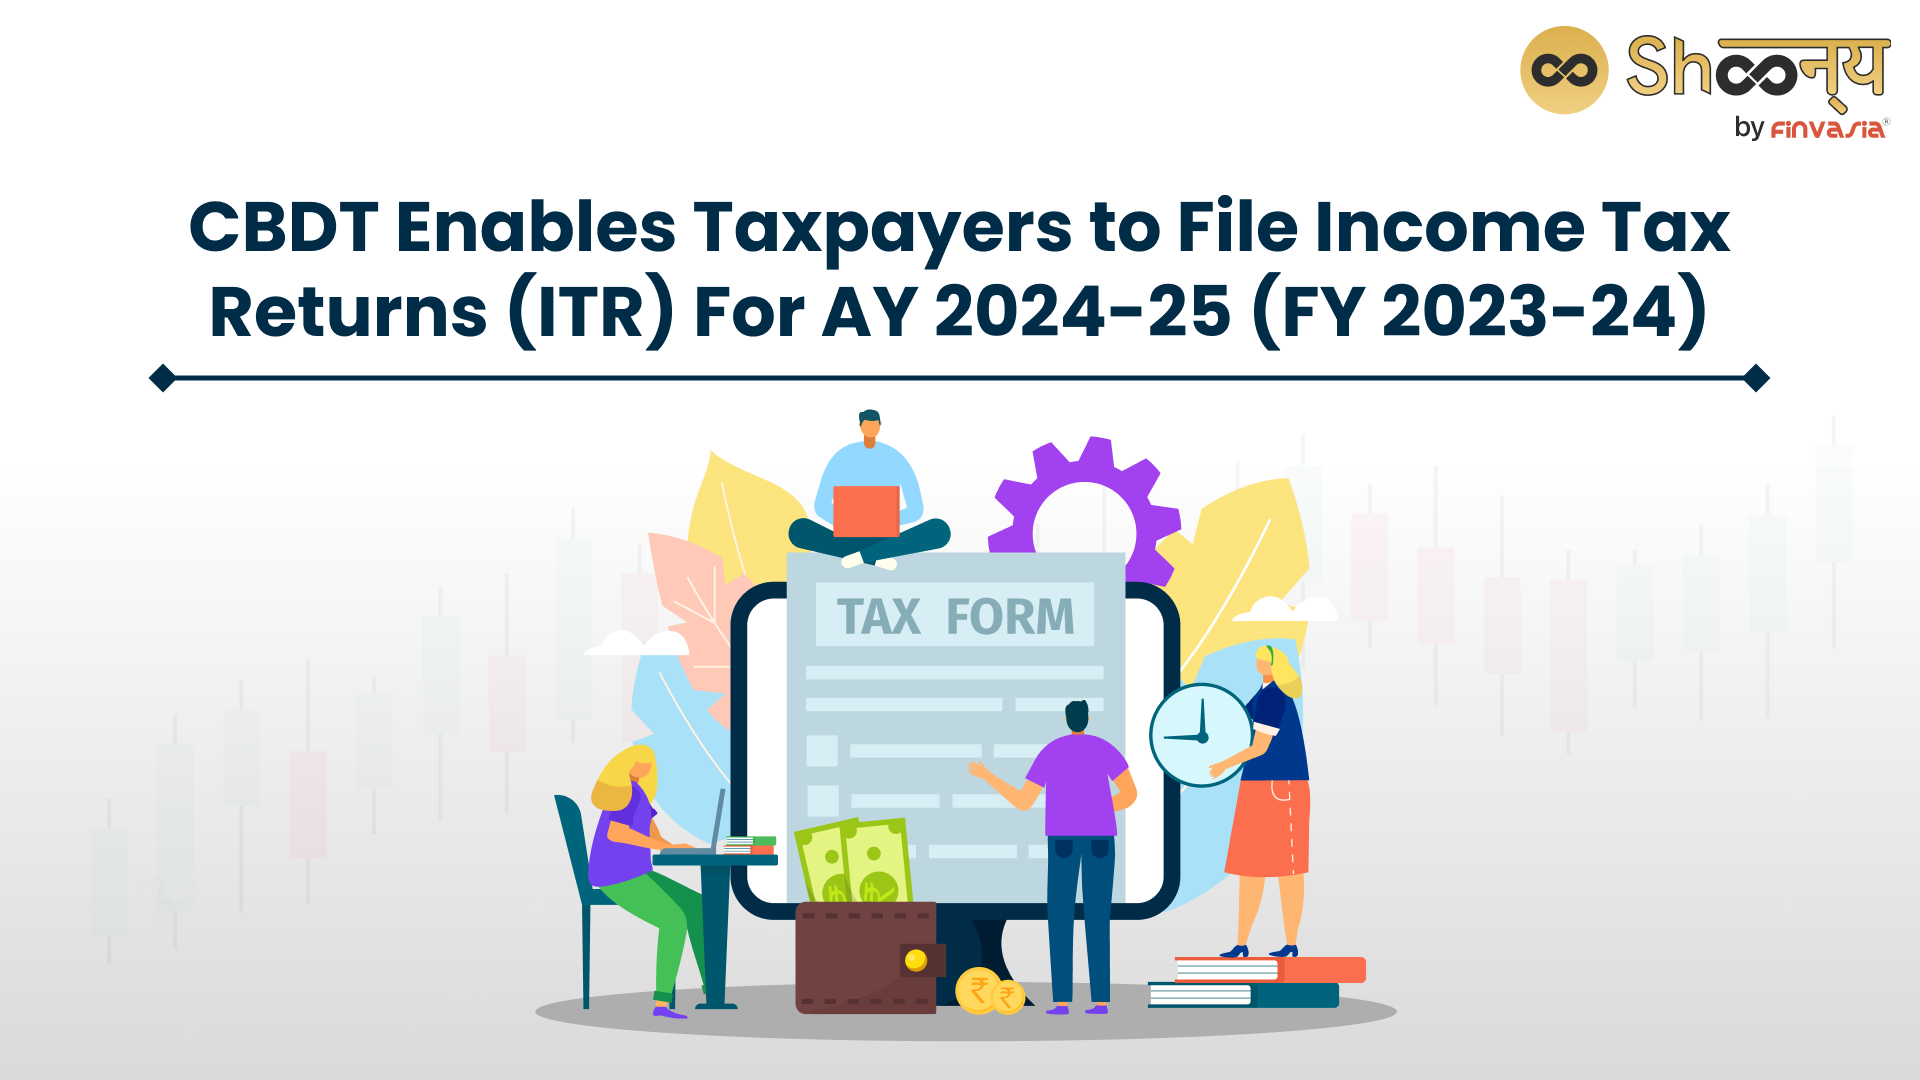 CBDT Announces The ITR Filing for AY 2024-25 (FY 2023-24)